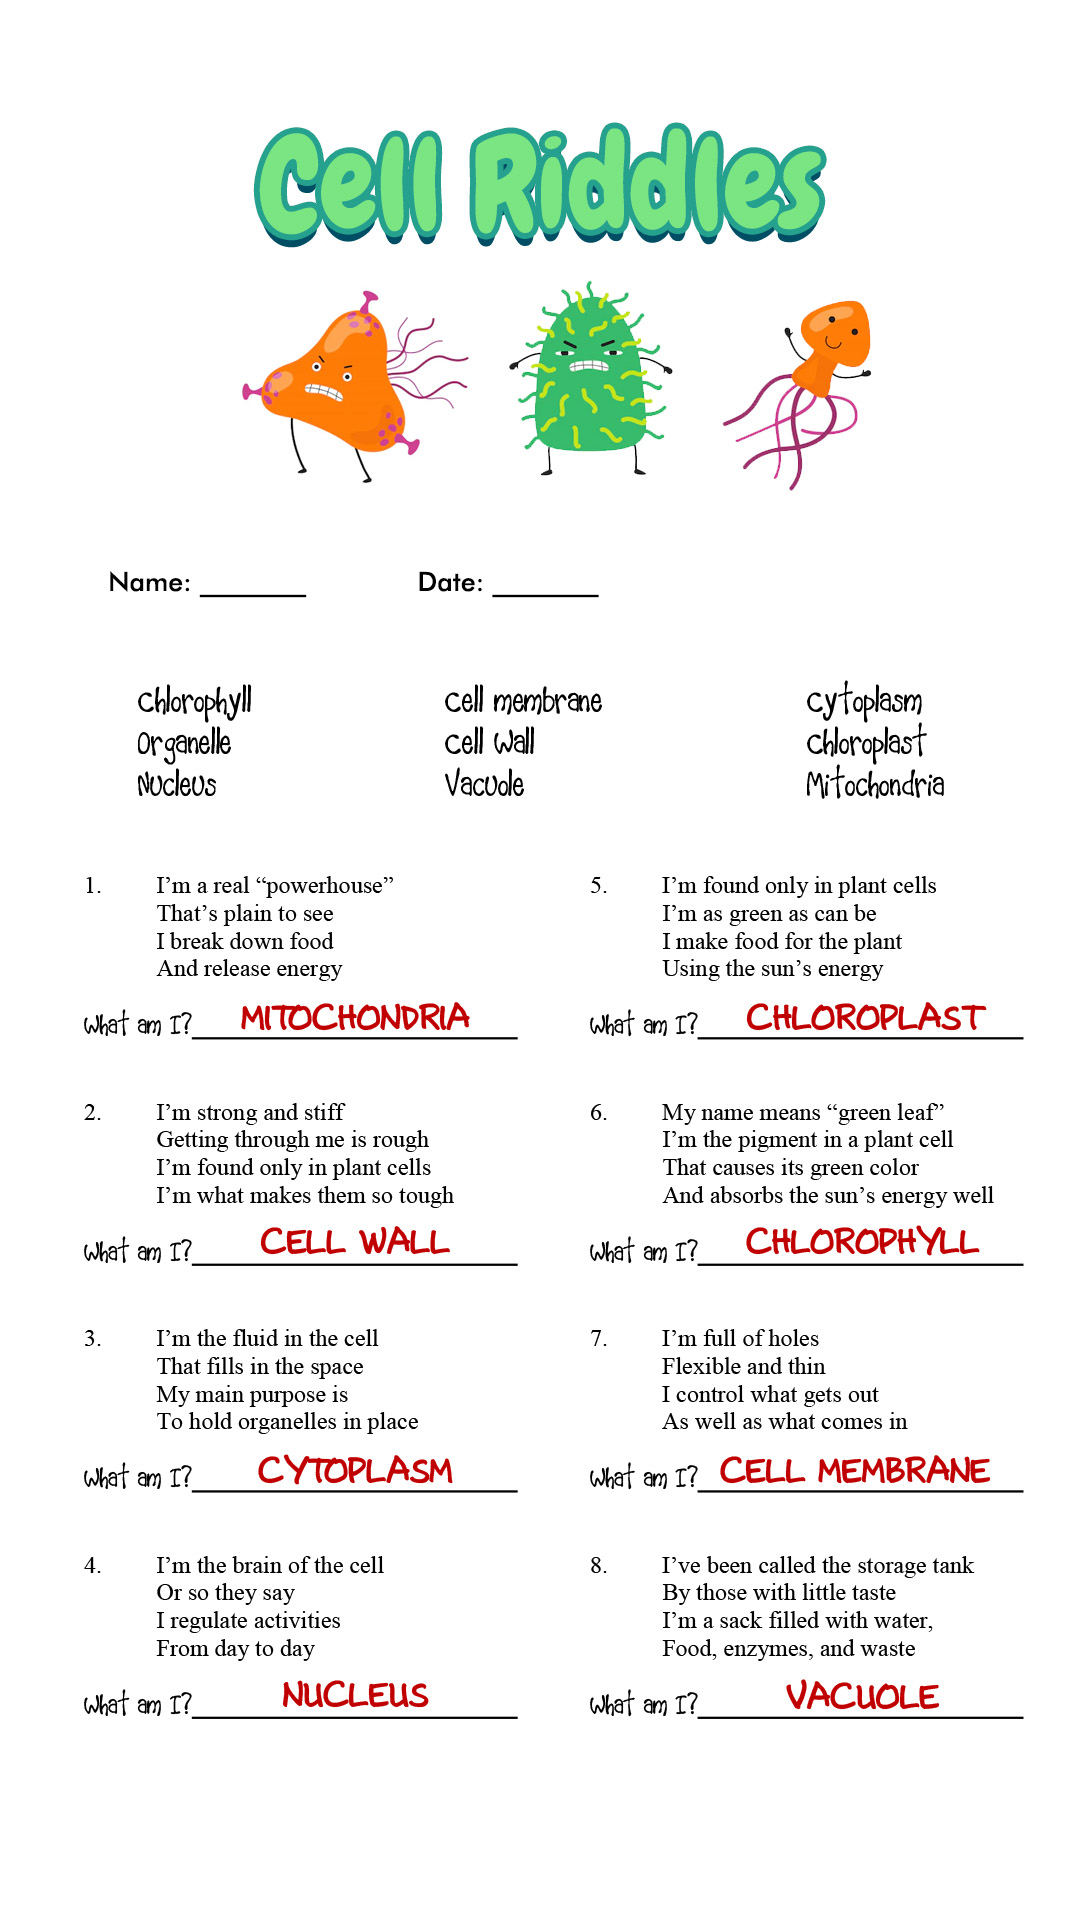 14 Best Images of Cell Organelle Riddles Worksheet Answers  Cells and Their Organelles 